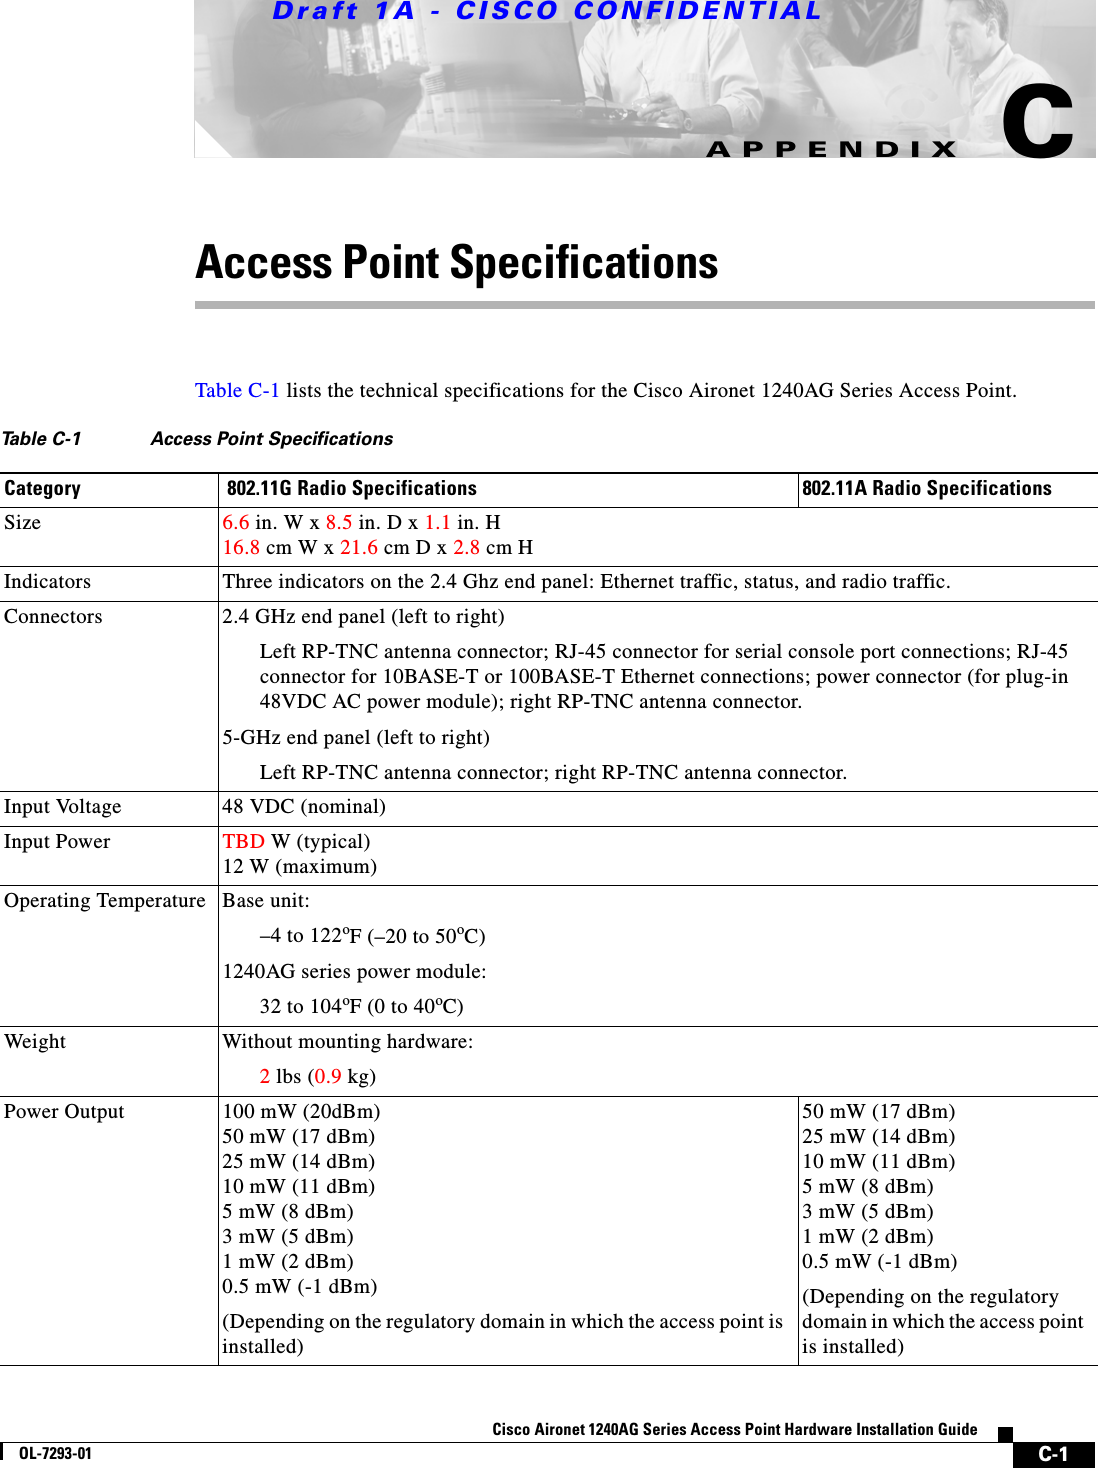 Draft 1A - CISCO CONFIDENTIALC-1Cisco Aironet 1240AG Series Access Point Hardware Installation GuideOL-7293-01APPENDIXCAccess Point Specifications Table C-1 lists the technical specifications for the Cisco Aironet 1240AG Series Access Point.  Table C-1 Access Point SpecificationsCategory  802.11G Radio Specifications 802.11A Radio SpecificationsSize 6.6 in. W x 8.5 in. D x 1.1 in. H 16.8 cm W x 21.6 cm D x 2.8 cm H Indicators Three indicators on the 2.4 Ghz end panel: Ethernet traffic, status, and radio traffic.Connectors 2.4 GHz end panel (left to right)Left RP-TNC antenna connector; RJ-45 connector for serial console port connections; RJ-45 connector for 10BASE-T or 100BASE-T Ethernet connections; power connector (for plug-in 48VDC AC power module); right RP-TNC antenna connector.5-GHz end panel (left to right)Left RP-TNC antenna connector; right RP-TNC antenna connector.Input Voltage  48 VDC (nominal)Input Power TBD W (typical)12 W (maximum)Operating Temperature Base unit:–4 to 122oF (–20 to 50oC) 1240AG series power module:32 to 104oF (0 to 40oC)Weight Without mounting hardware:2 lbs (0.9 kg) Power Output 100 mW (20dBm)50 mW (17 dBm)25 mW (14 dBm)10 mW (11 dBm)5 mW (8 dBm)3 mW (5 dBm)1 mW (2 dBm)0.5 mW (-1 dBm)(Depending on the regulatory domain in which the access point is installed)50 mW (17 dBm)25 mW (14 dBm)10 mW (11 dBm)5 mW (8 dBm)3 mW (5 dBm)1 mW (2 dBm)0.5 mW (-1 dBm)(Depending on the regulatory domain in which the access point is installed)